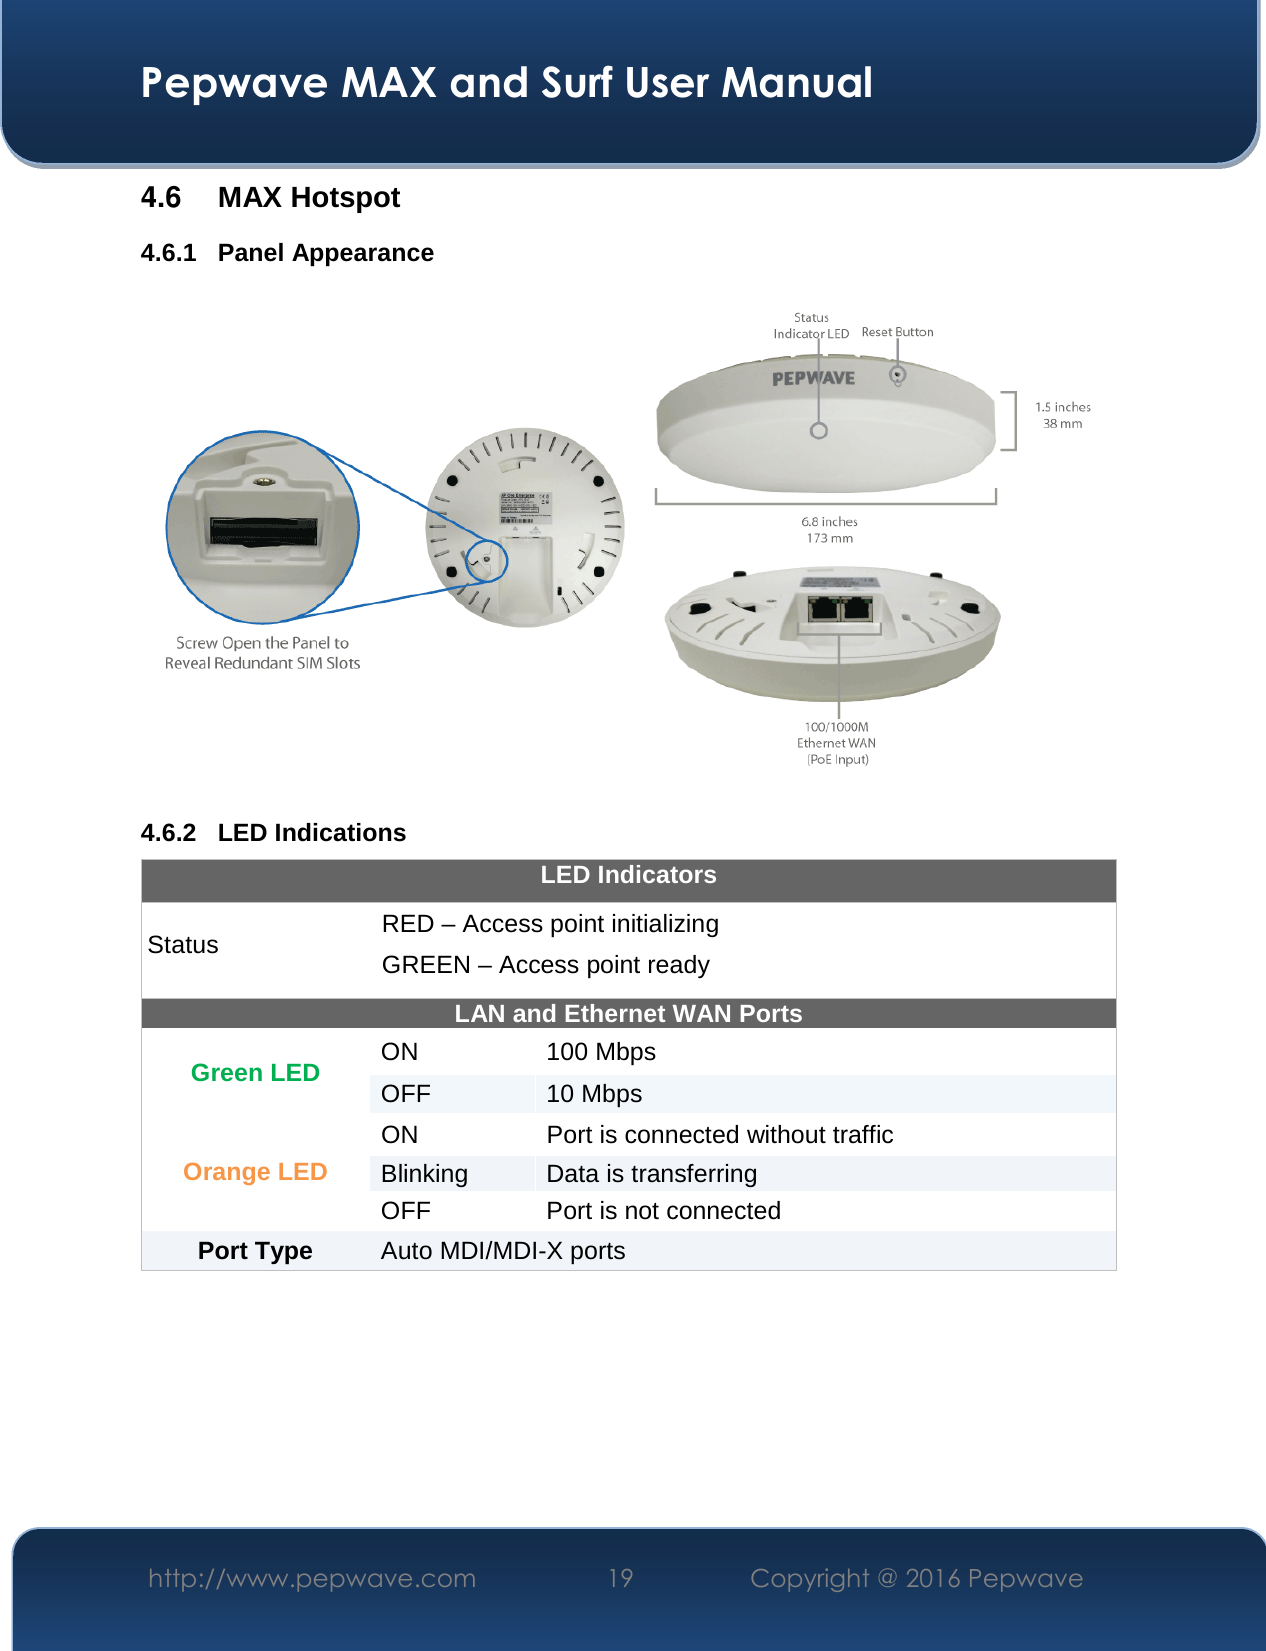  Pepwave MAX and Surf User Manual http://www.pepwave.com  19    Copyright @ 2016 Pepwave   4.6  MAX Hotspot 4.6.1 Panel Appearance   4.6.2 LED Indications LED Indicators Status  RED – Access point initializing GREEN – Access point ready LAN and Ethernet WAN Ports  Green LED  ON  100 Mbps OFF  10 Mbps Orange LED ON  Port is connected without traffic Blinking  Data is transferring OFF  Port is not connected Port Type   Auto MDI/MDI-X ports     